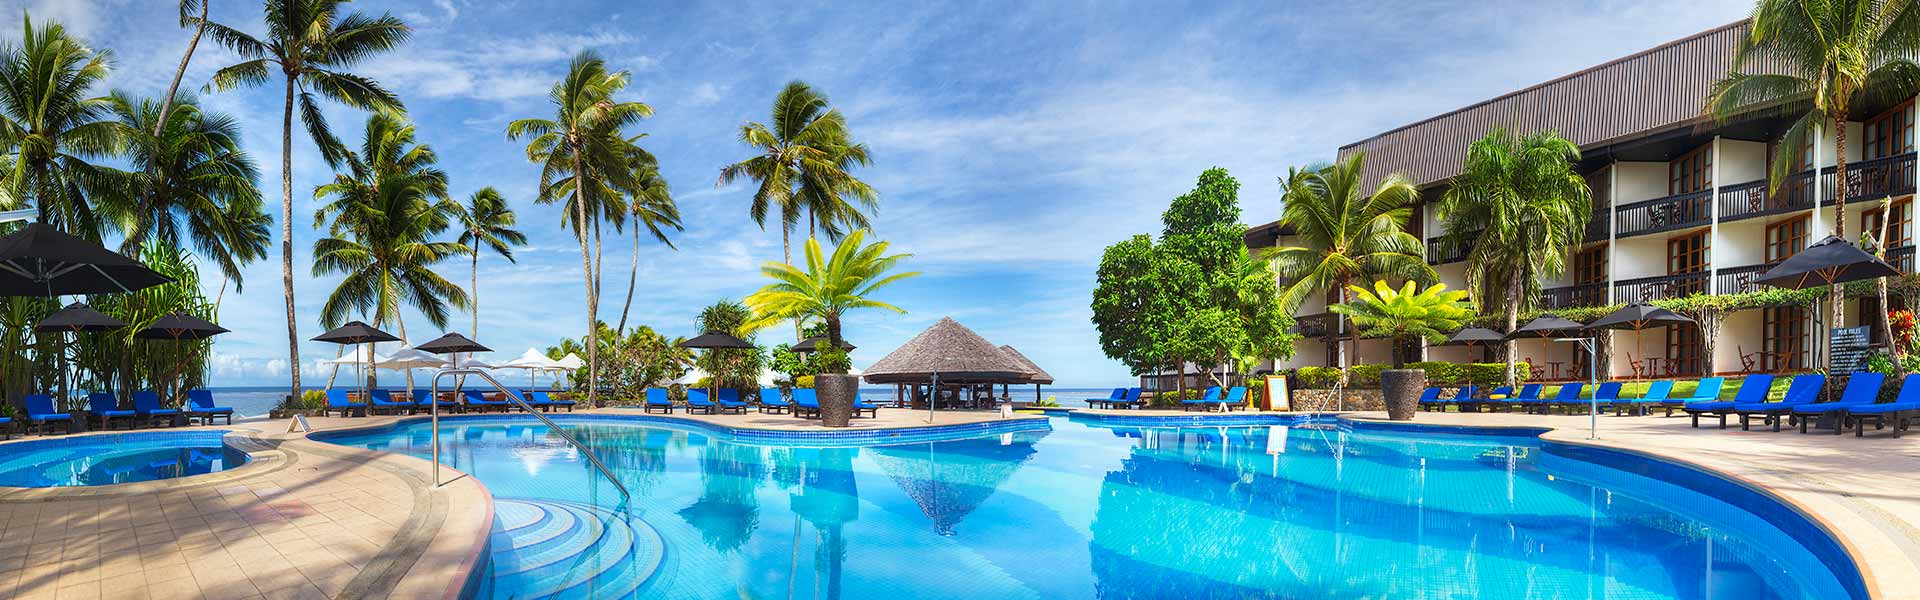 5 Nights Holiday Package in Fiji Islands!